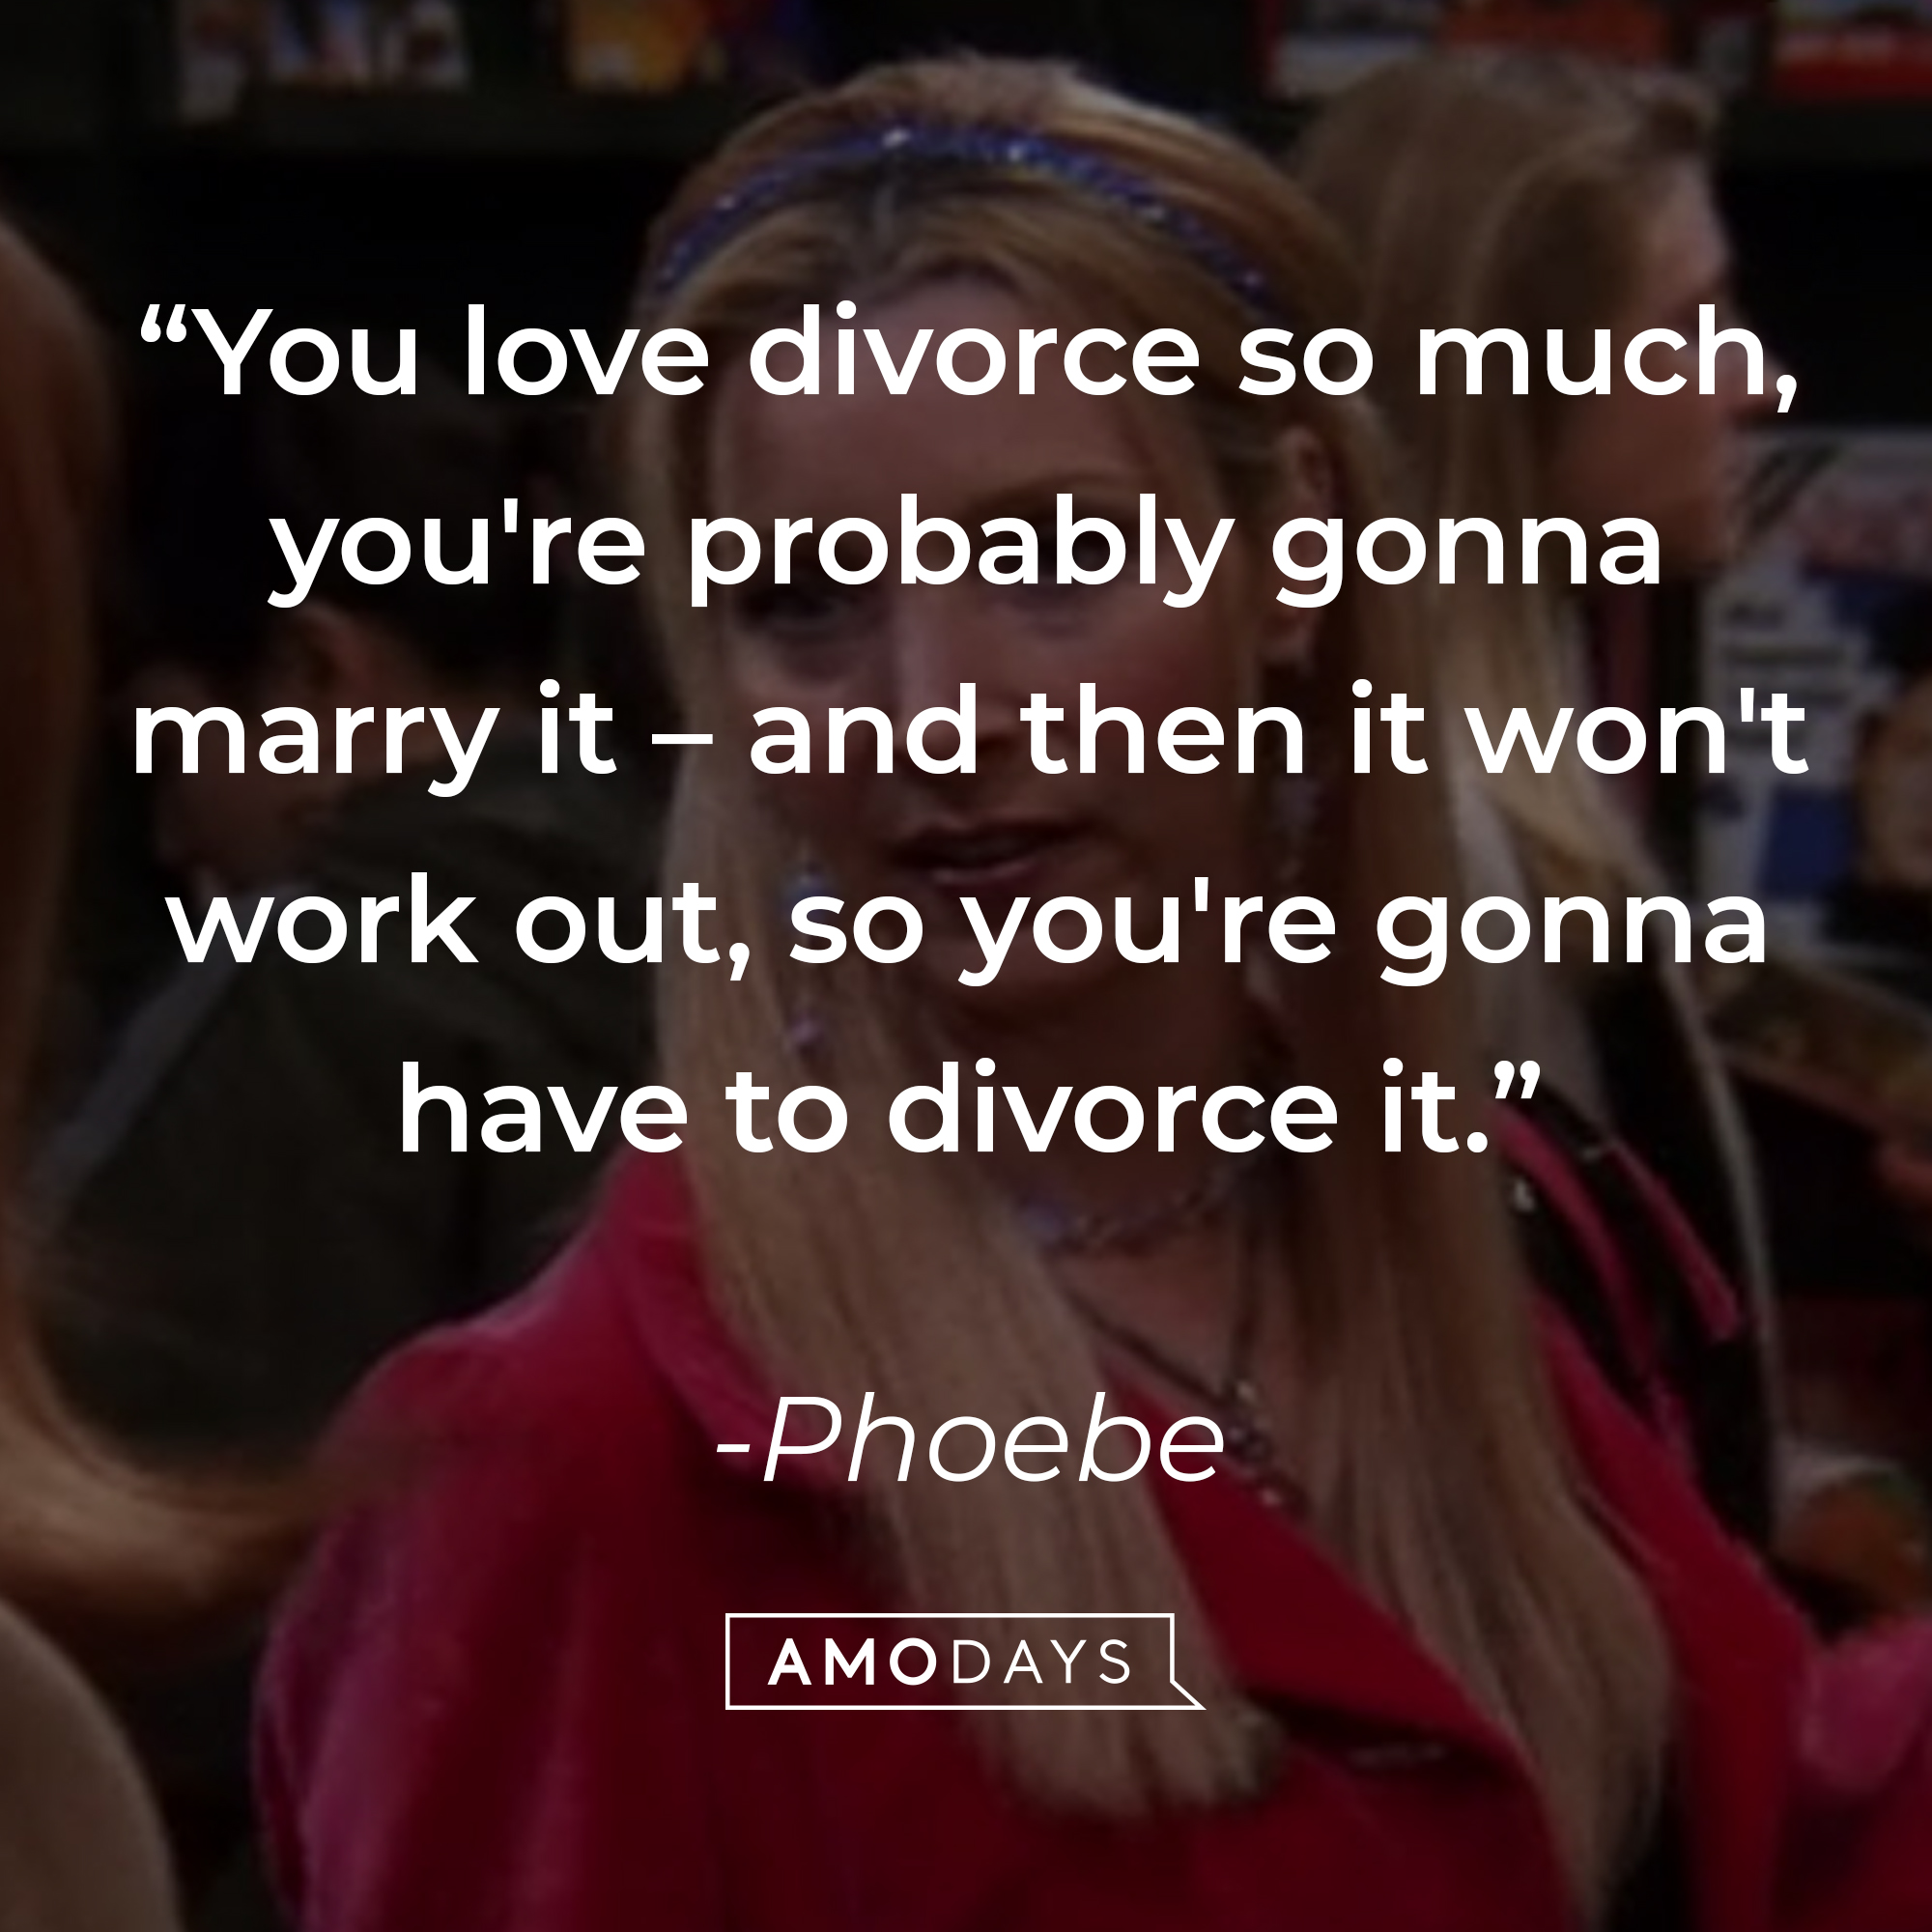 Phoebe's quote: "You love divorce so much, you're probably gonna marry it – and then it won't work out, so you're gonna have to divorce it." | Source: Facebook.com/friends.tv